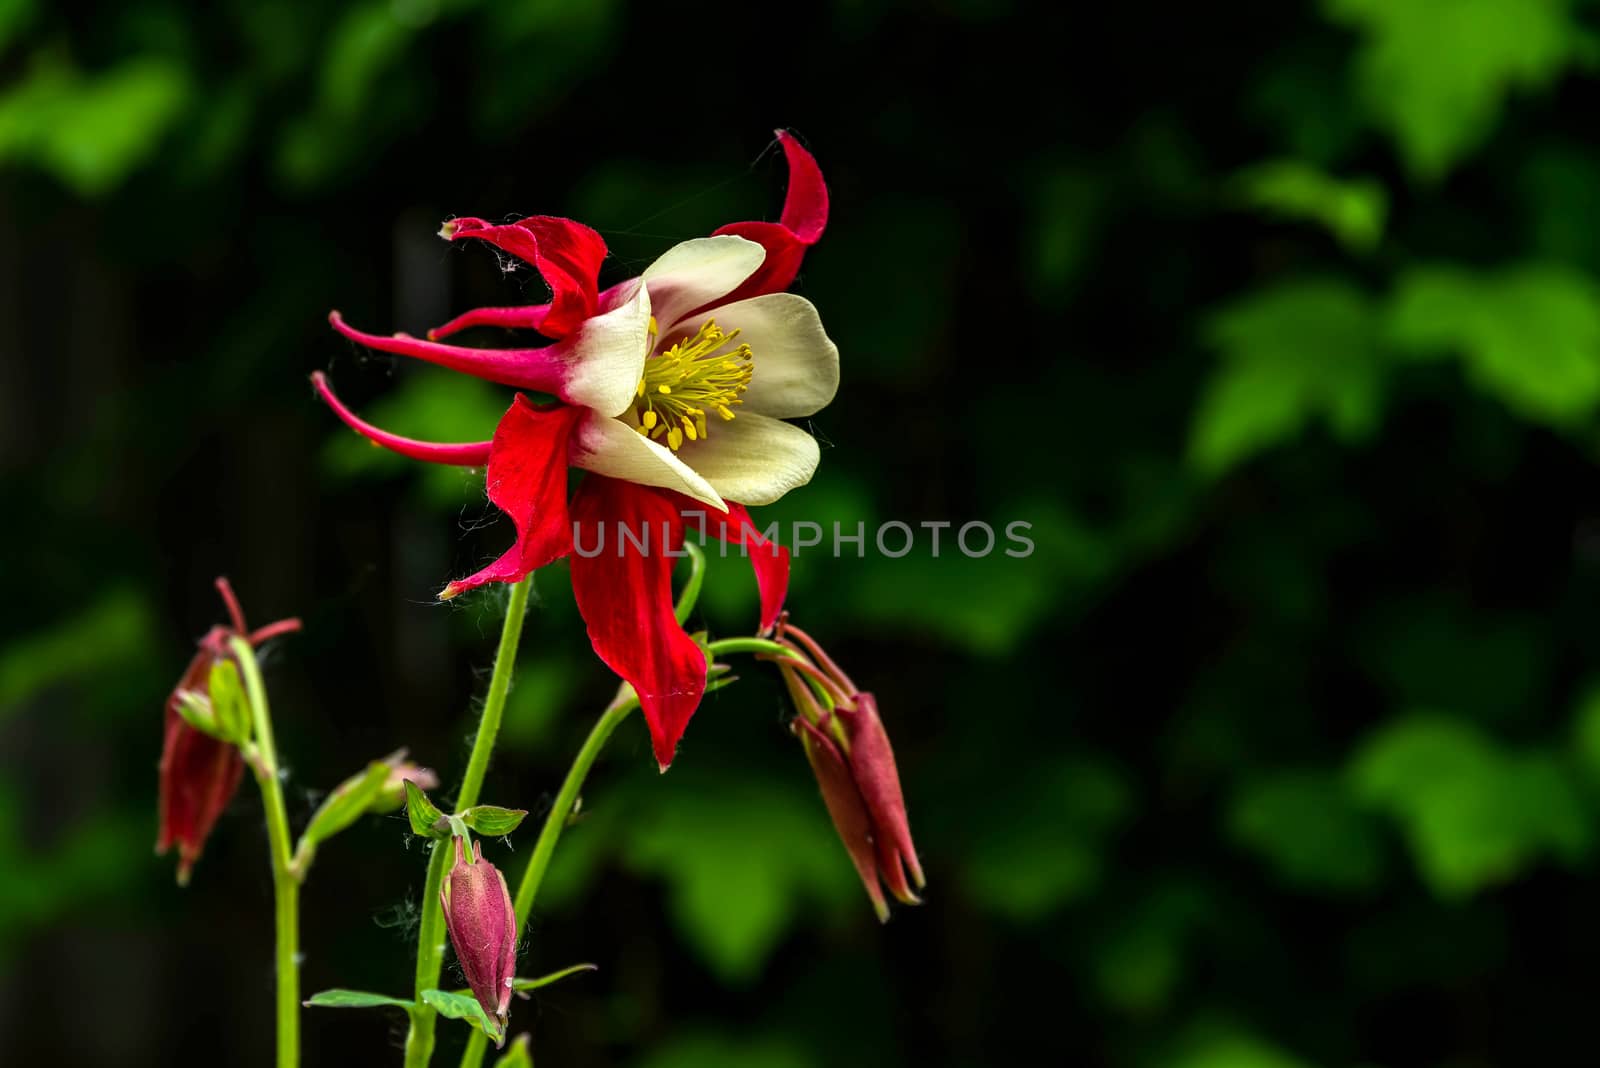 Eastern Columbine with green background.